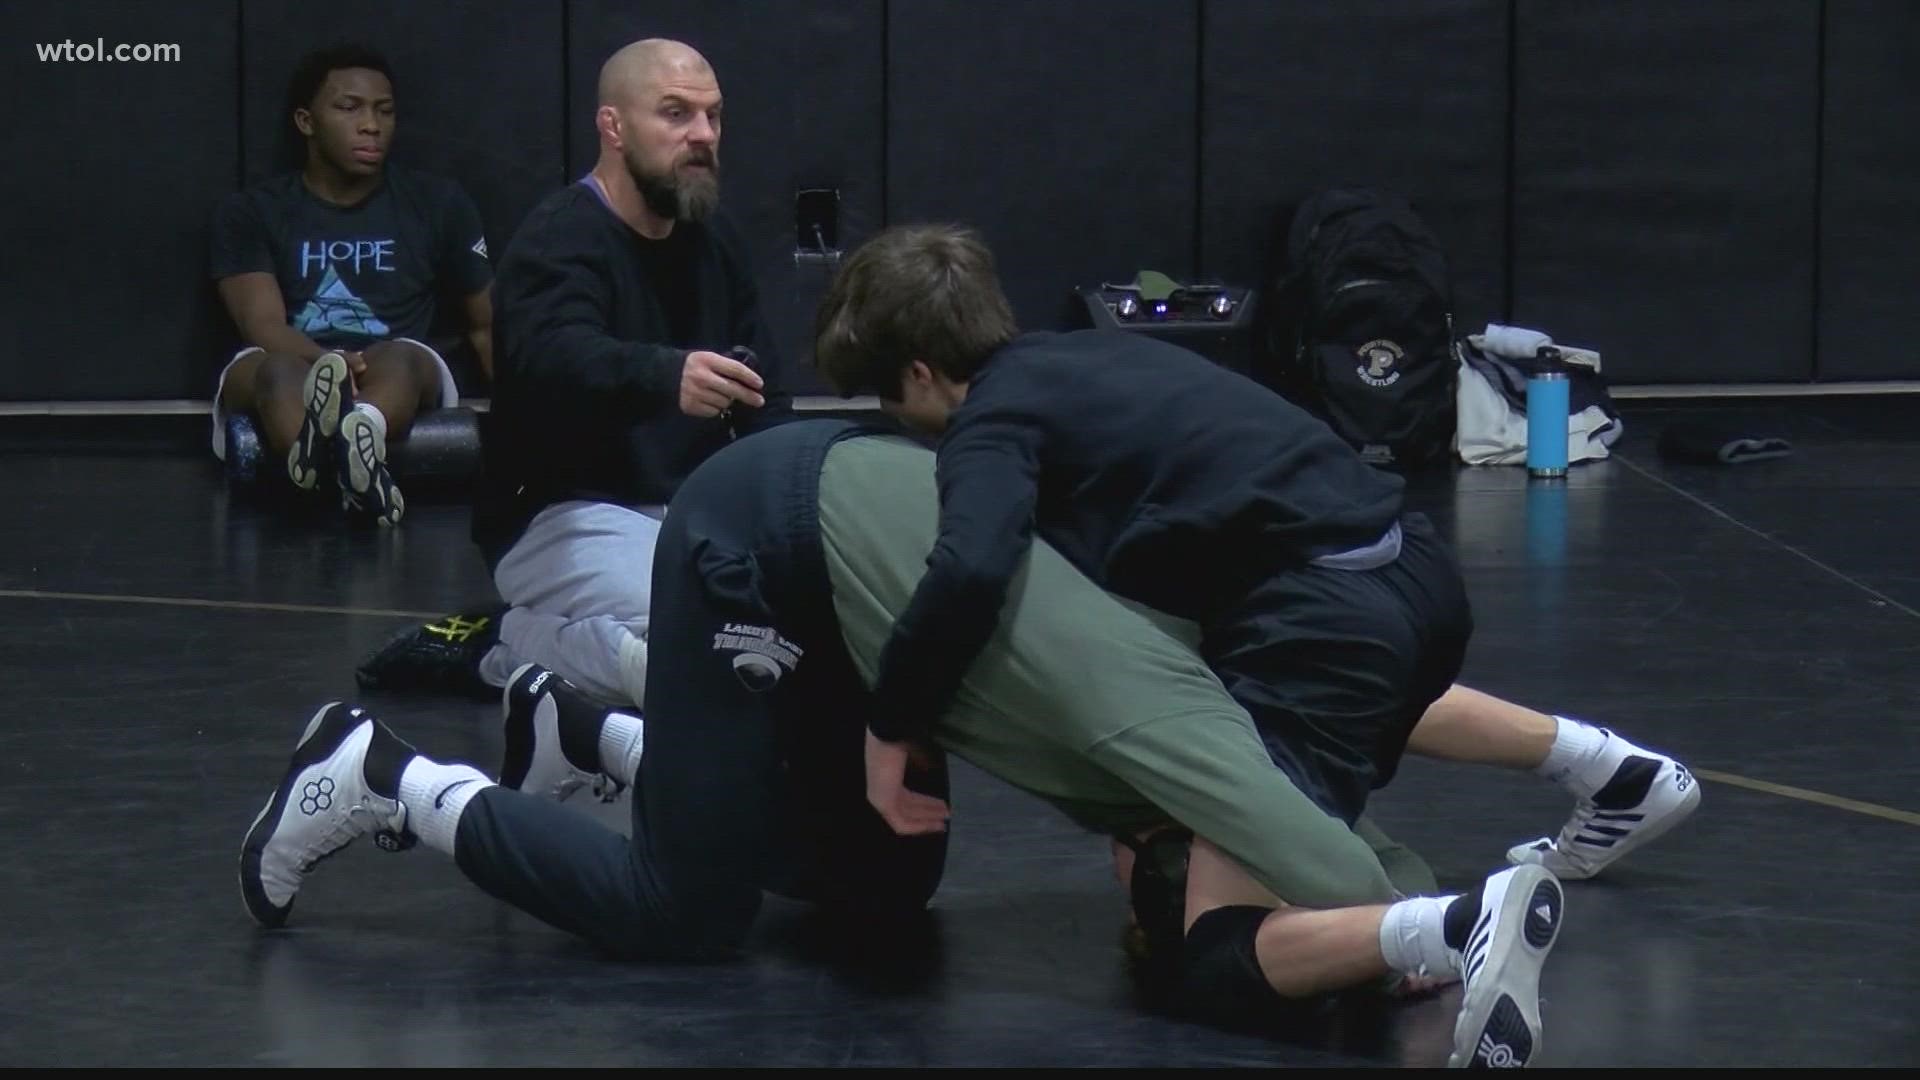 Joey and Marcus Blaze are making a name for themselves on the mat for the Jackets.